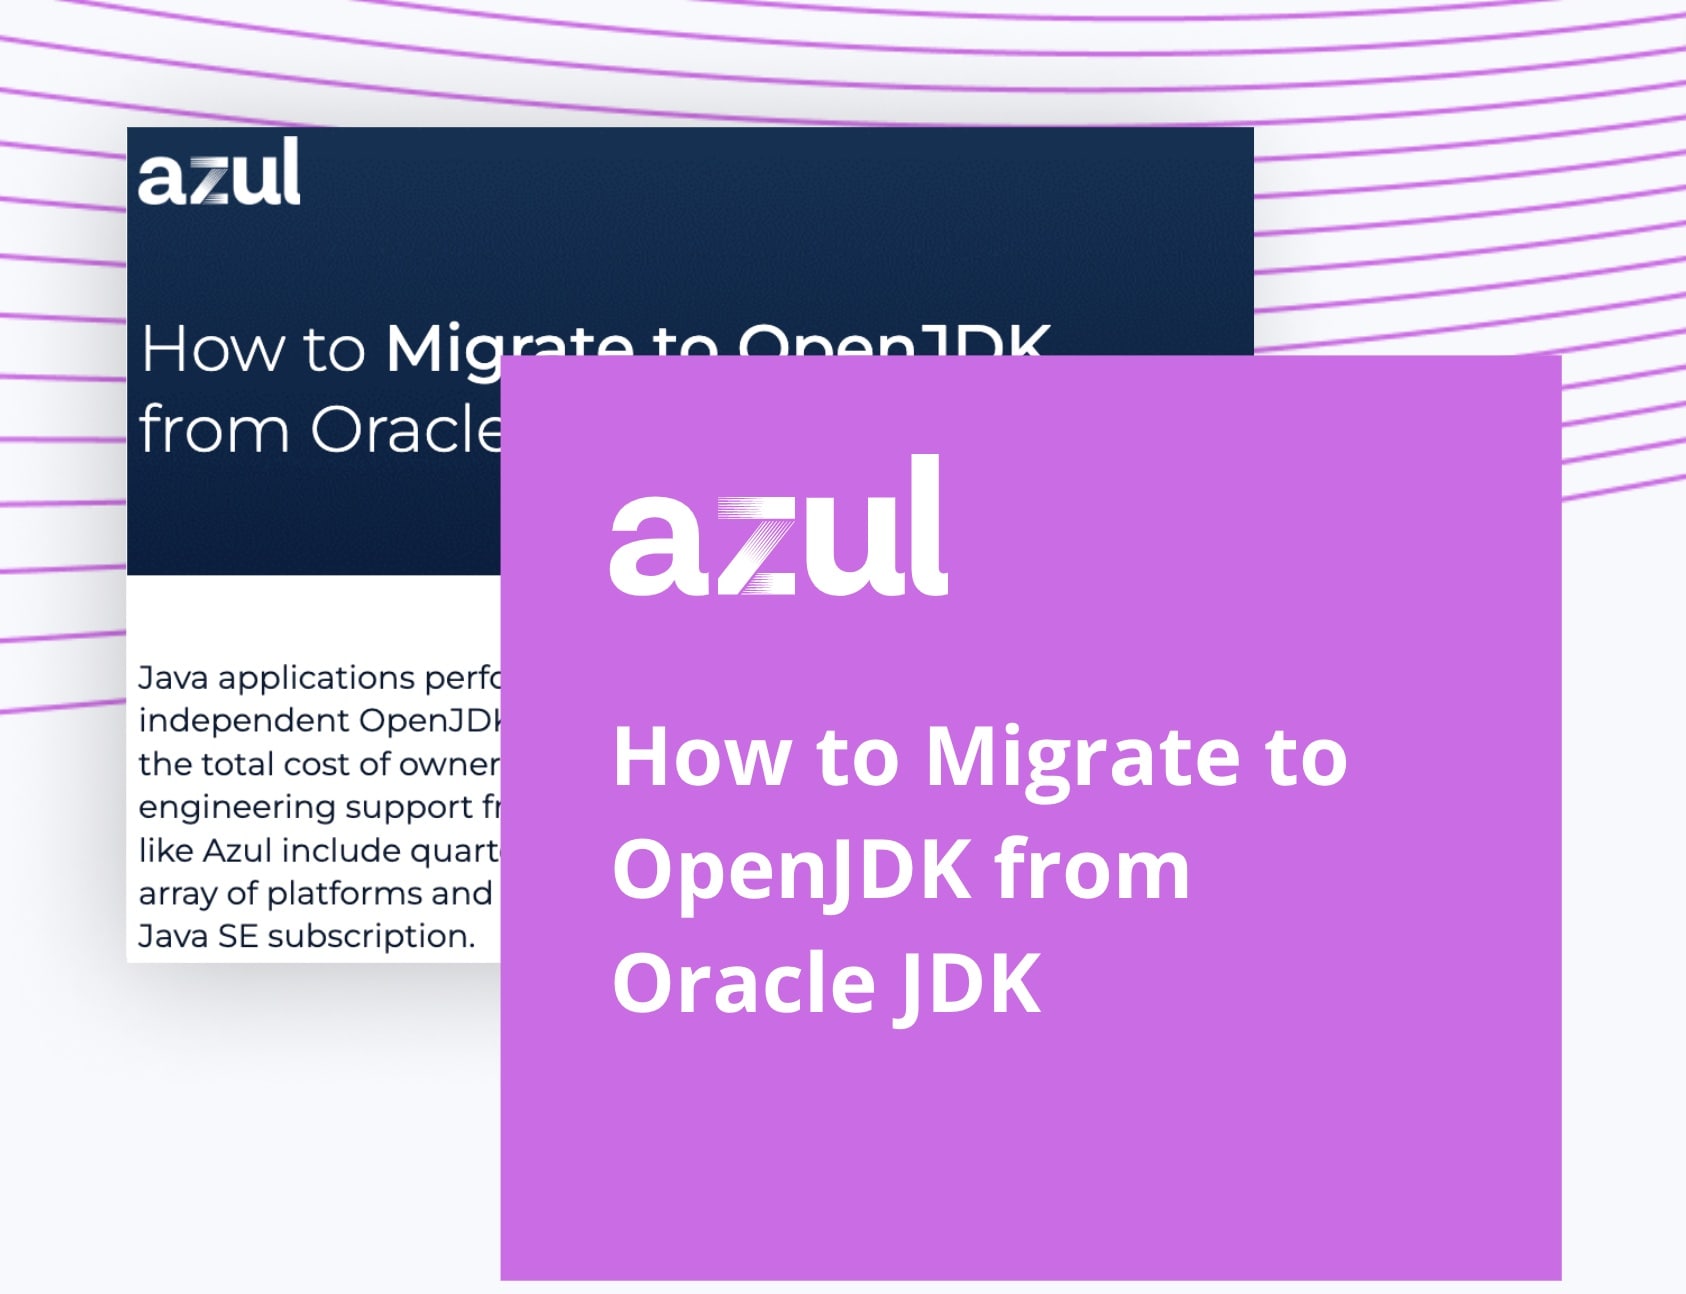 How to Migrate to OpenJDK from Oracle JDK